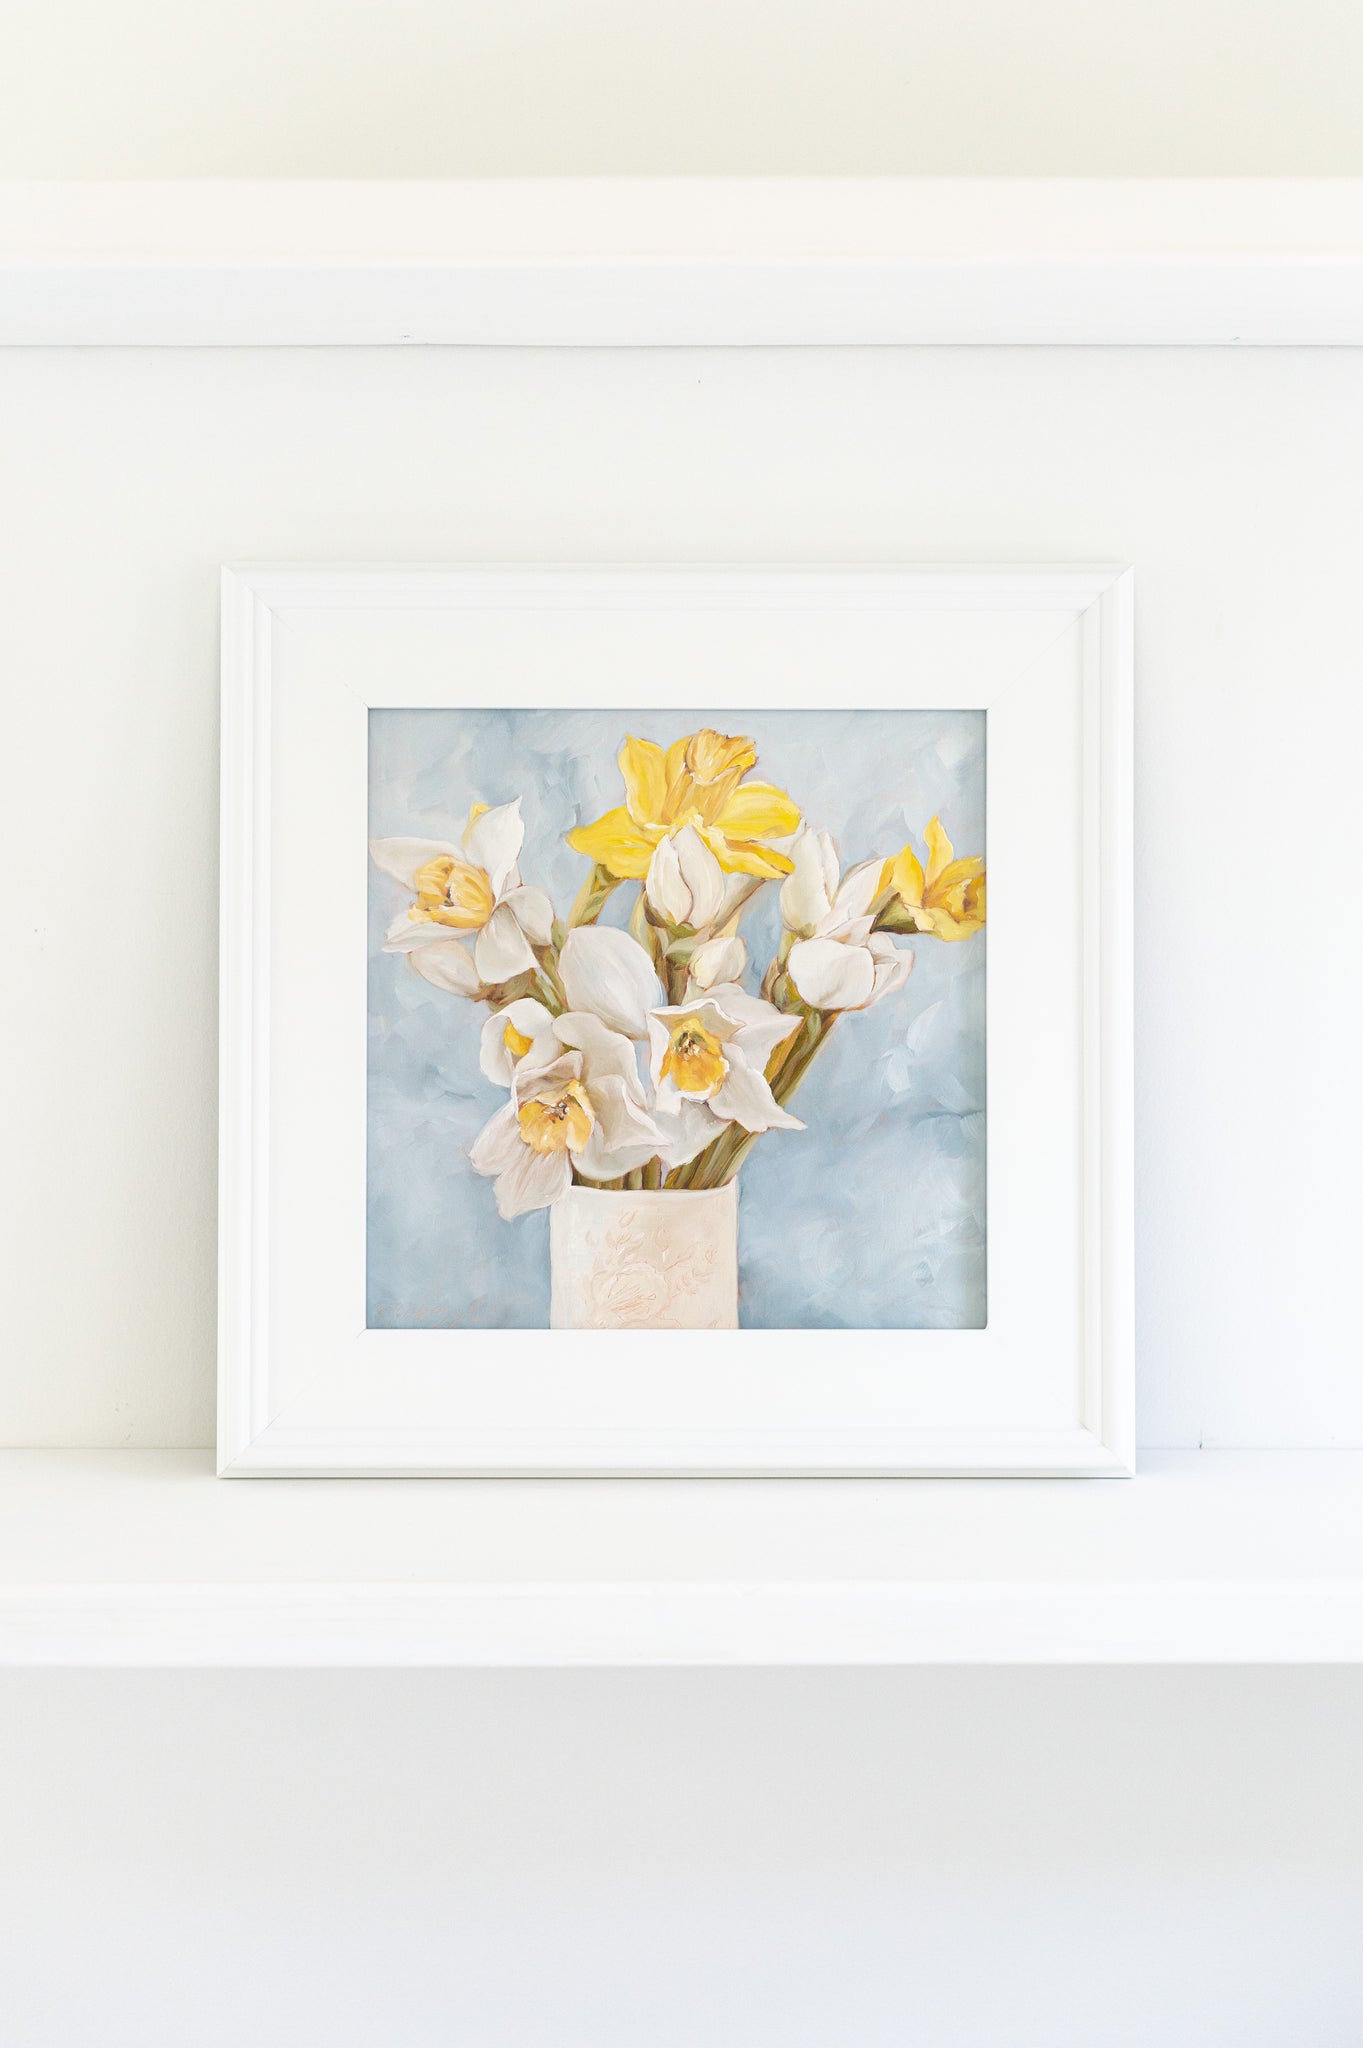 Daffodils - 12x12" Framed Oil Painting